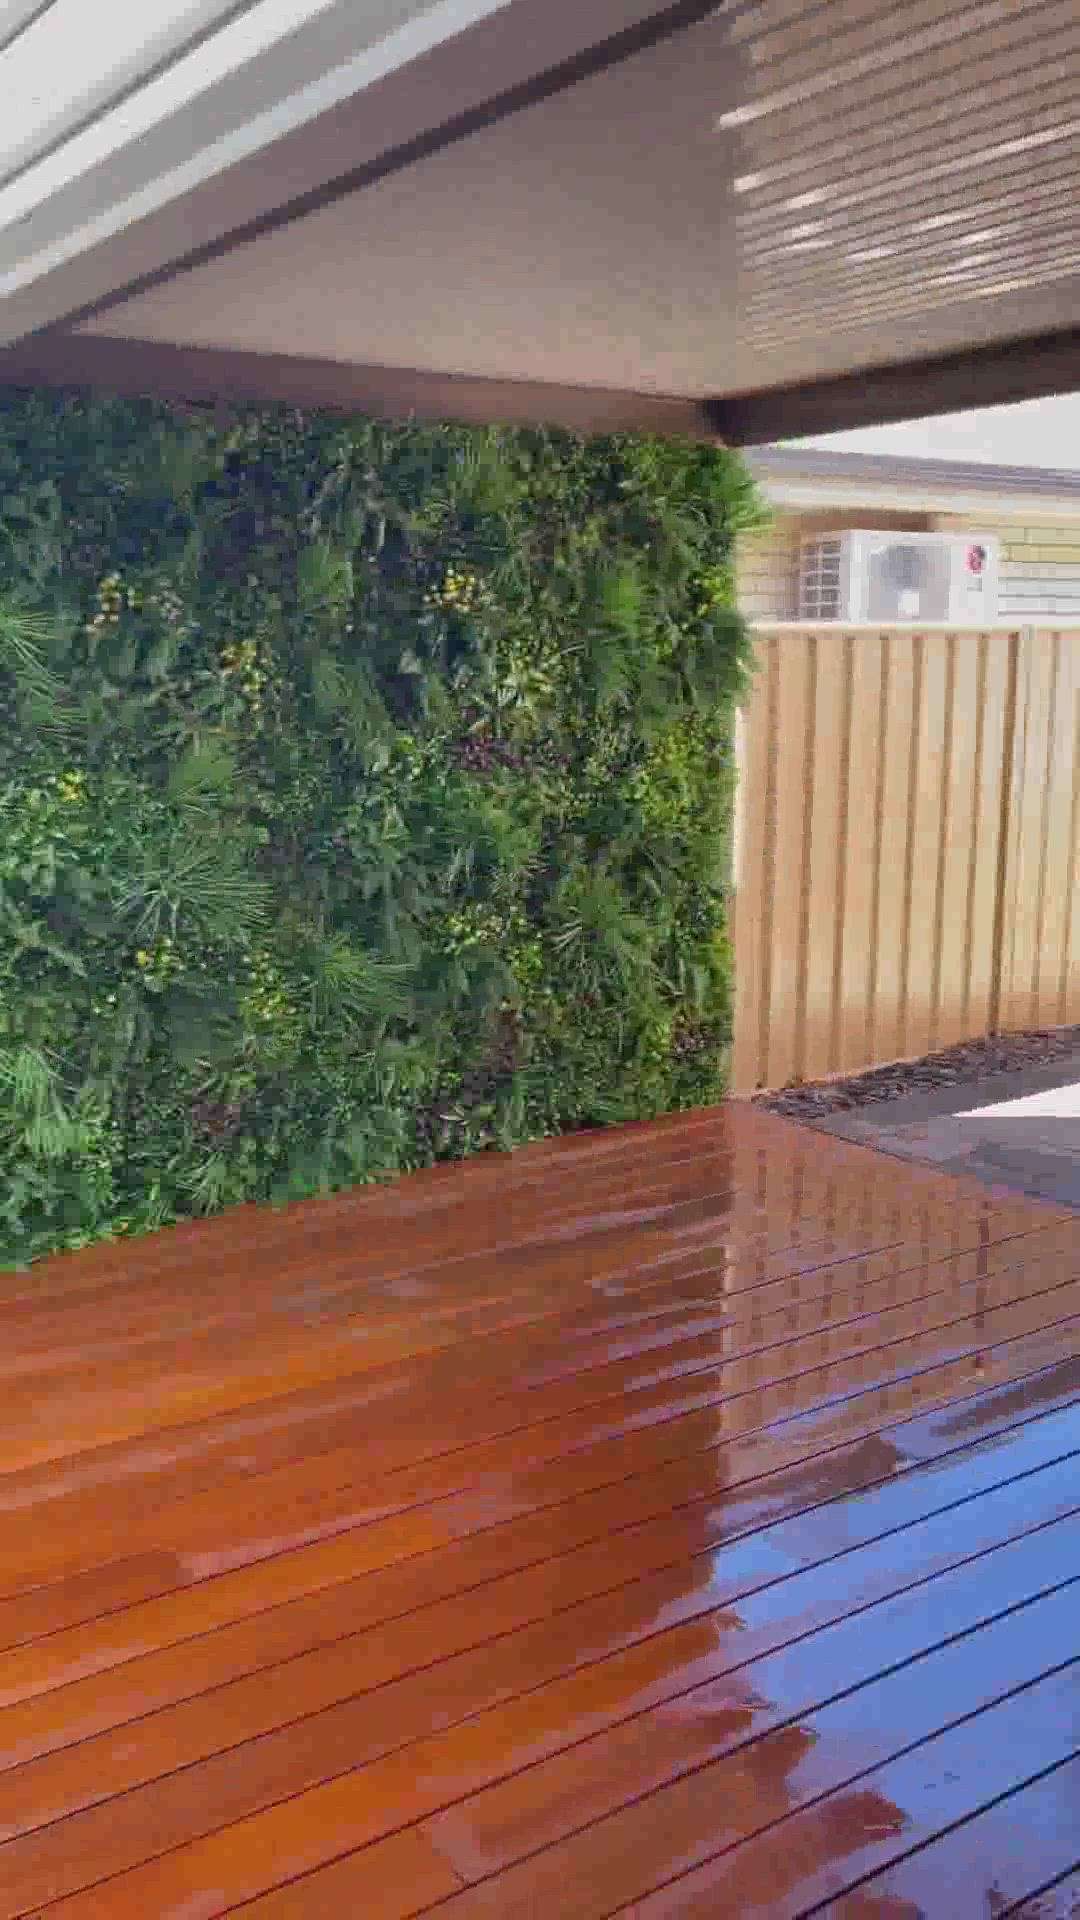 We provide our customers with a range of customised artificial green wall options to choose from. You can easily create an indoor or outdoor green wall for your space. We make high-quality hedges and greenery that looks like living green walls, without the need to trim, water or maintain them.
Finally, you can enjoy forever green walls!

📞 9818616727
✉️ greenspacedecor55@gmail.com

@greenspacedecorr
@greenspacedecorr
.
.
.
.
.
.
.
.
.
.
.
.
.
.
.
.
.
.
.
.

#homedecor #homegoods #moderninterior #homeinteriors #homedecorating #homedecoraccent #artificialplants #greenwall #artificialgreenwalls #interiordesigning #homedecorator #verticalwallgarden #greenwalls #homedecorindia #greenspacedecor #mumbaiinteriordesigner #interiordesignersmumbai #delhiinteriordesigner #interiordesignersdelhi #hyderabadinteriordesigners #bangaloreinteriordesigners